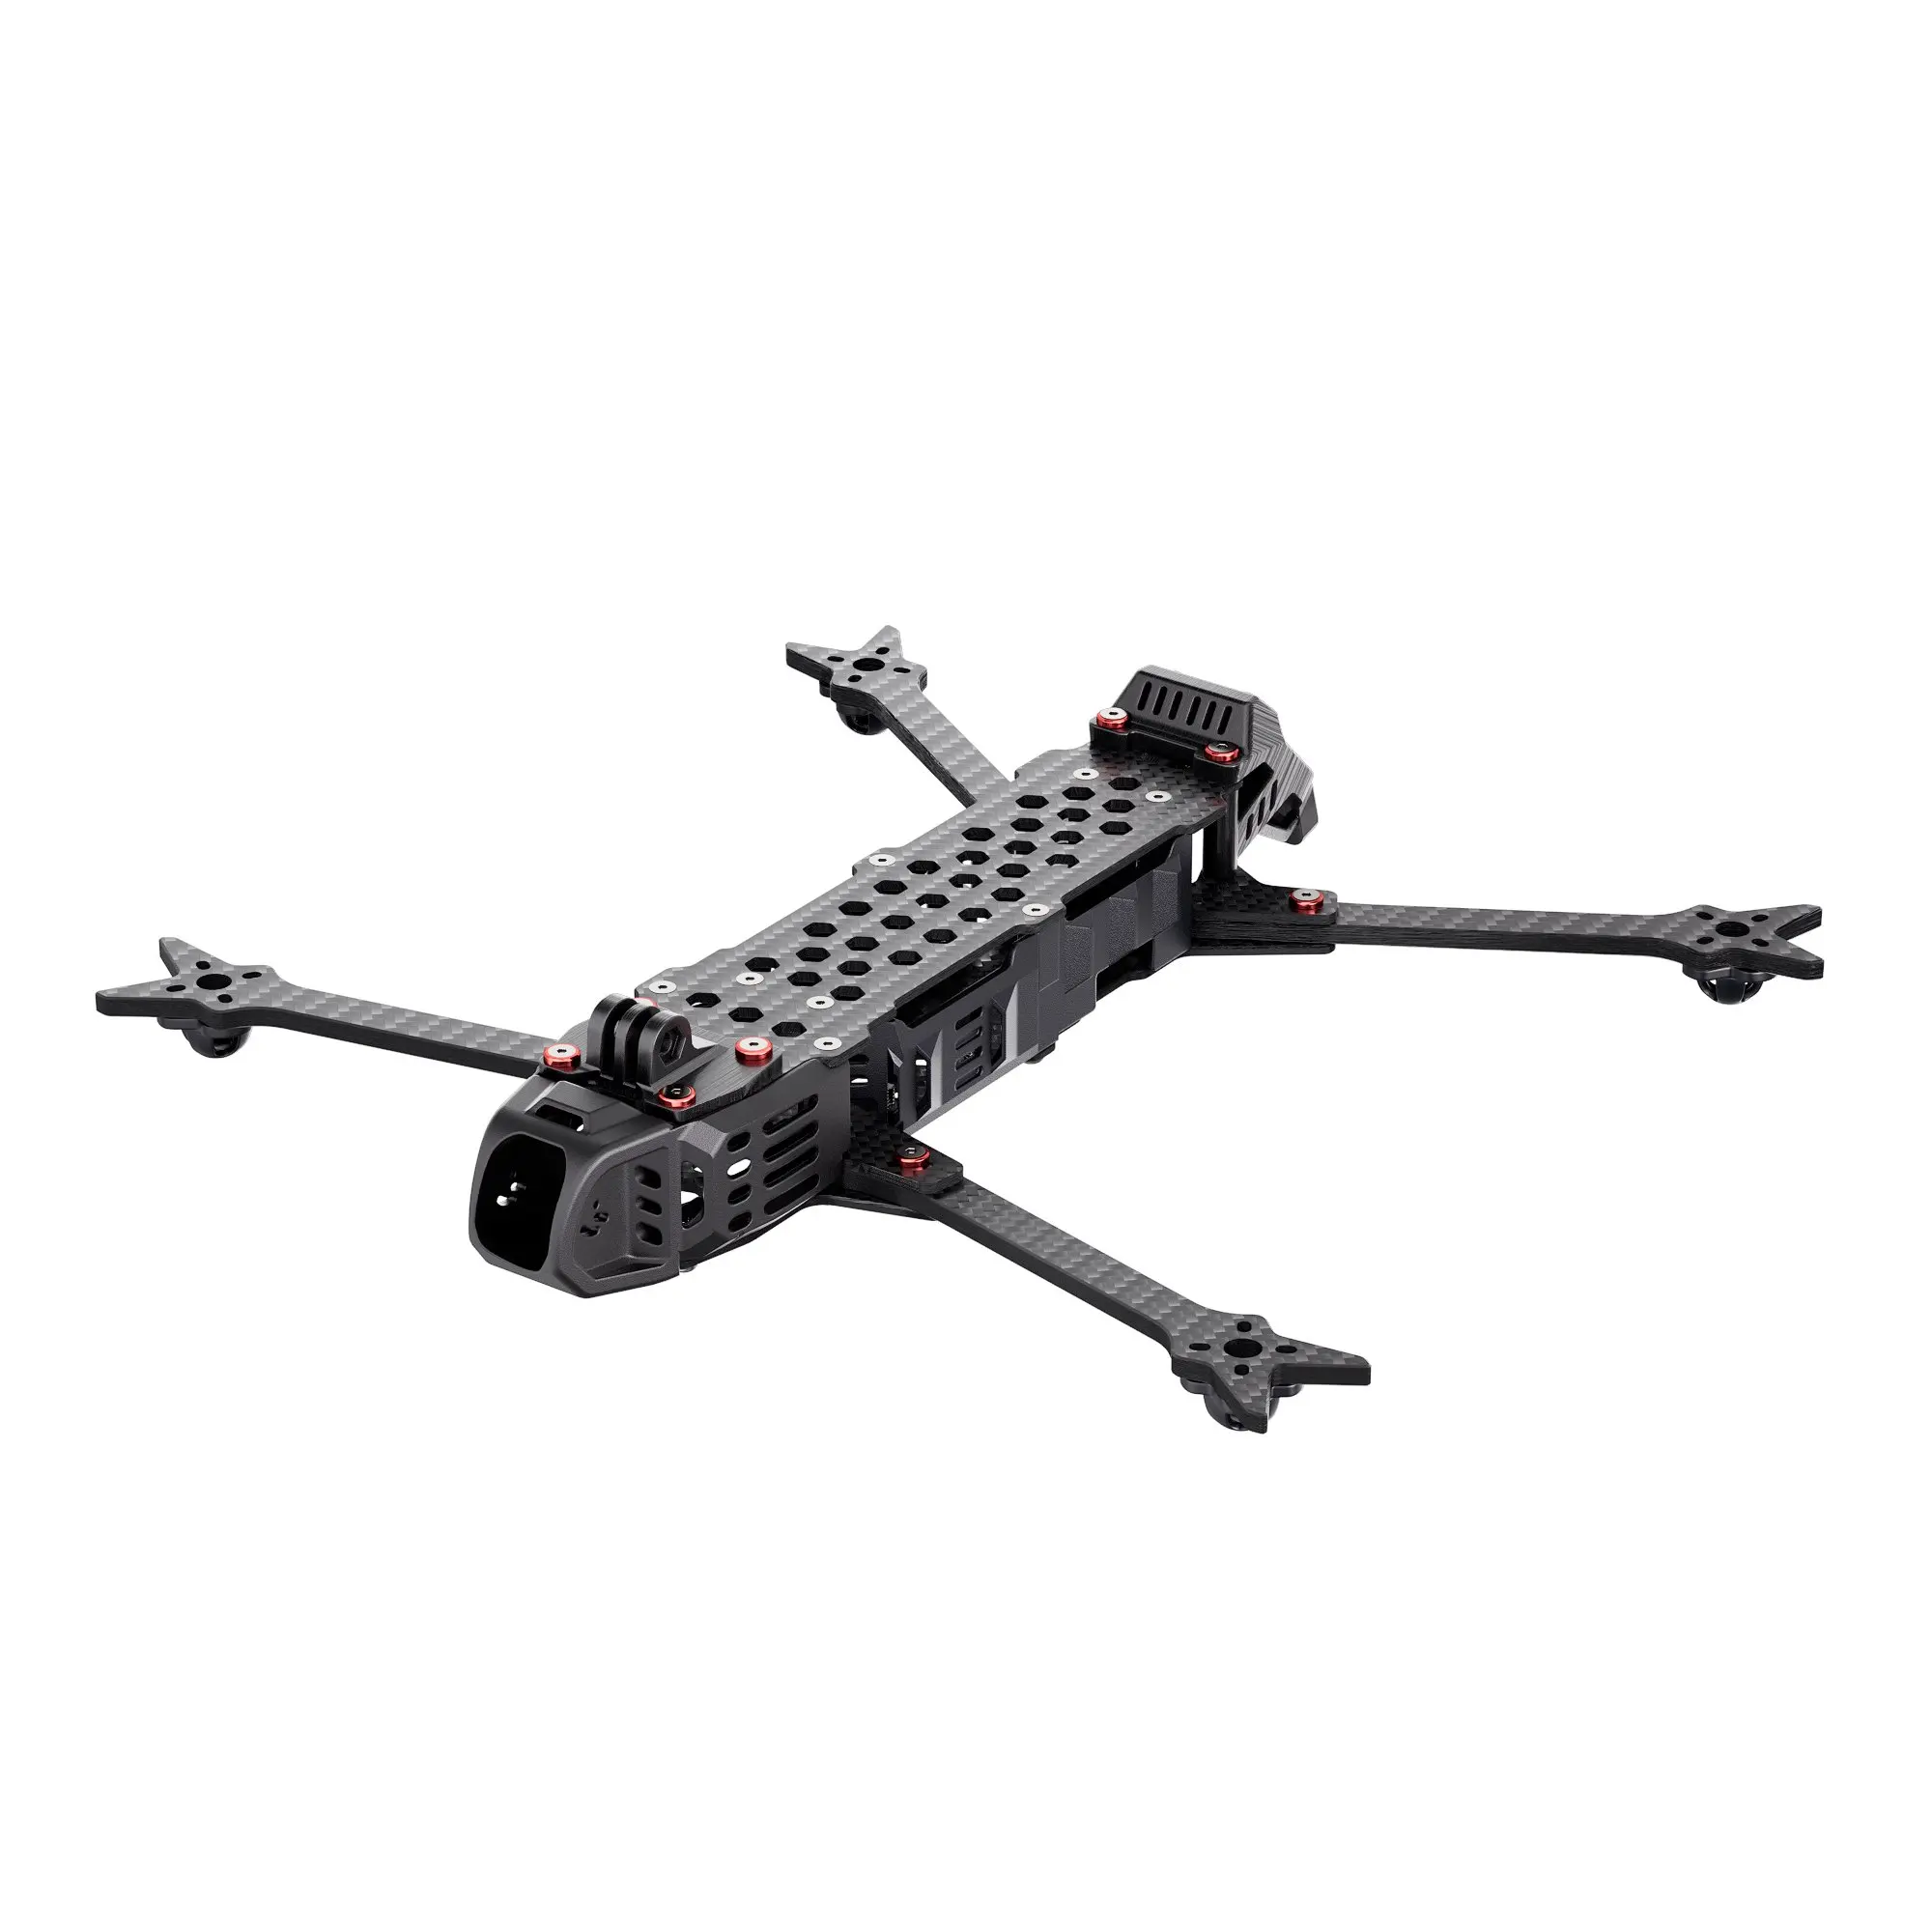 

GEPRC GEP-LC75 V3 Frame Suitable For Crocodile75 V3 Series Drone Carbon Fiber For DIY RC FPV Quadcopter Freestyle Drone Parts